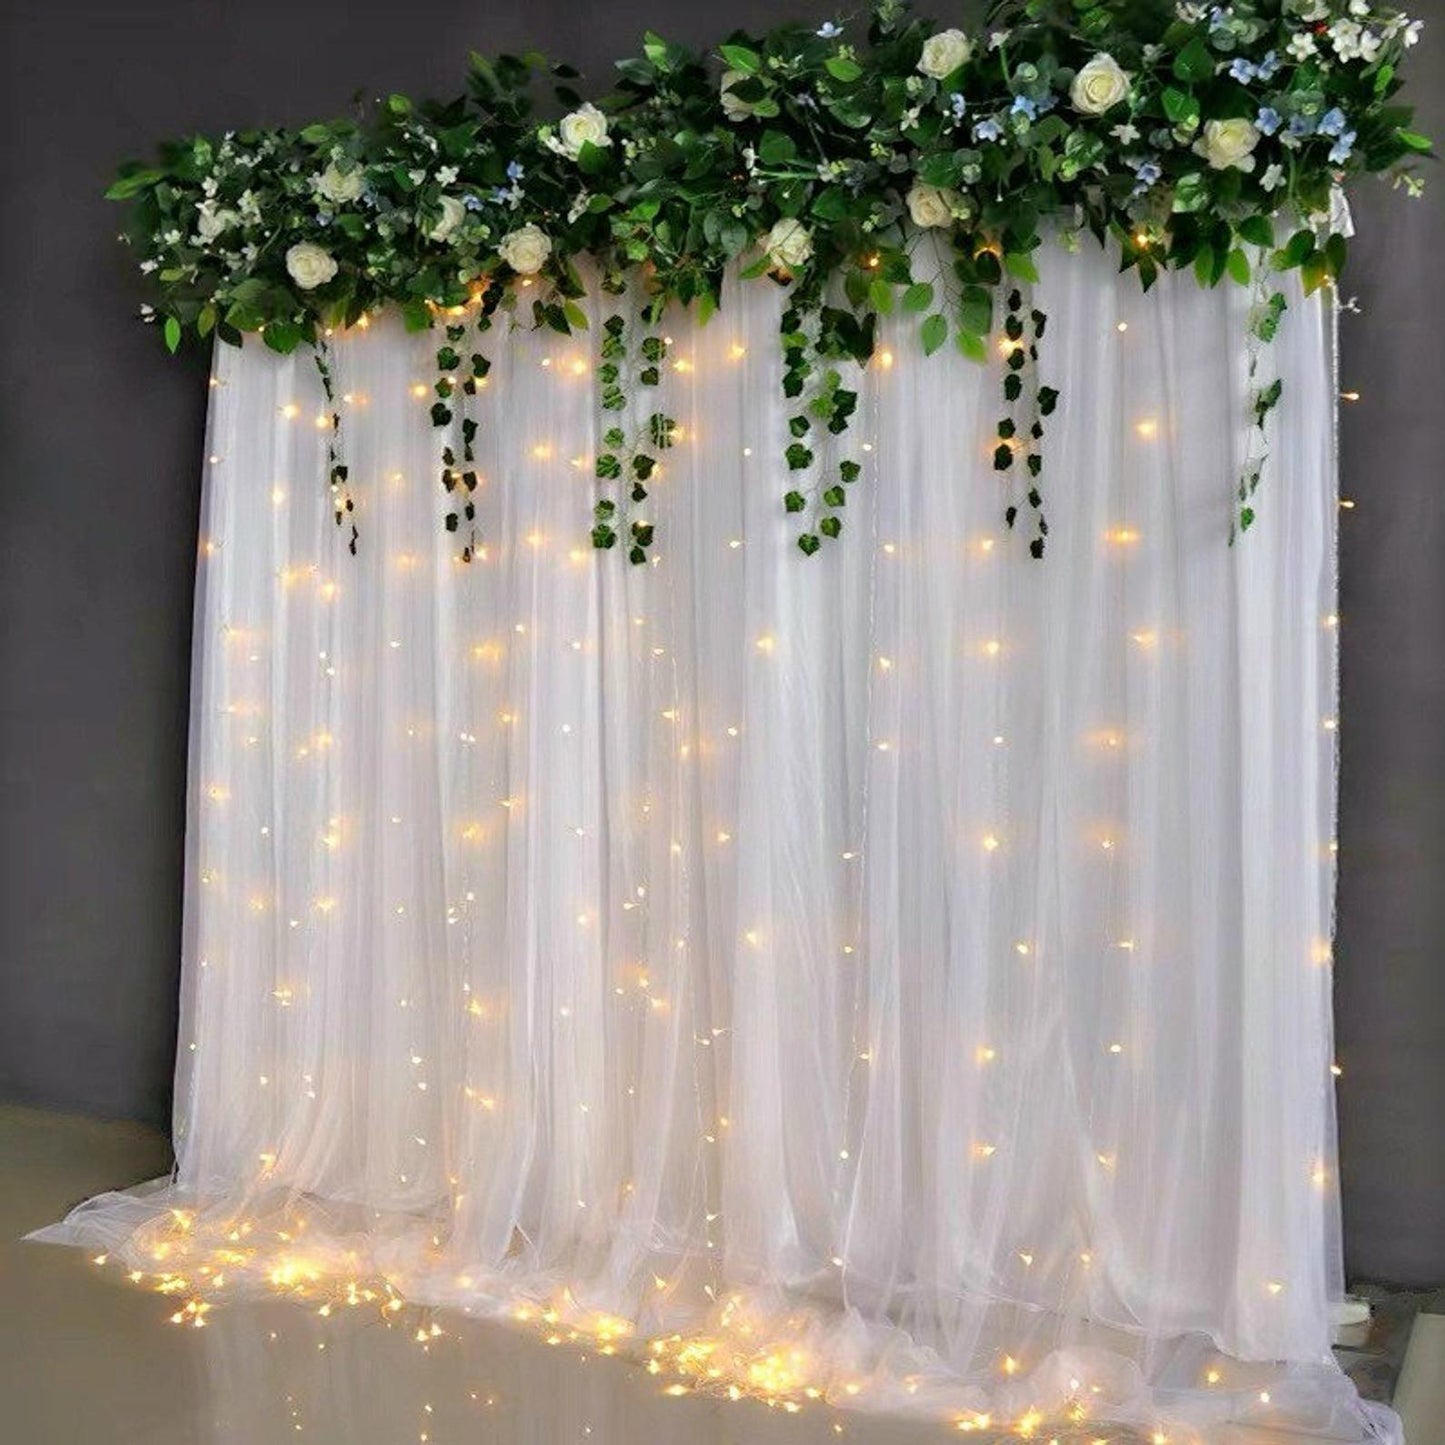 Window Curtain String Lights - If you say i do